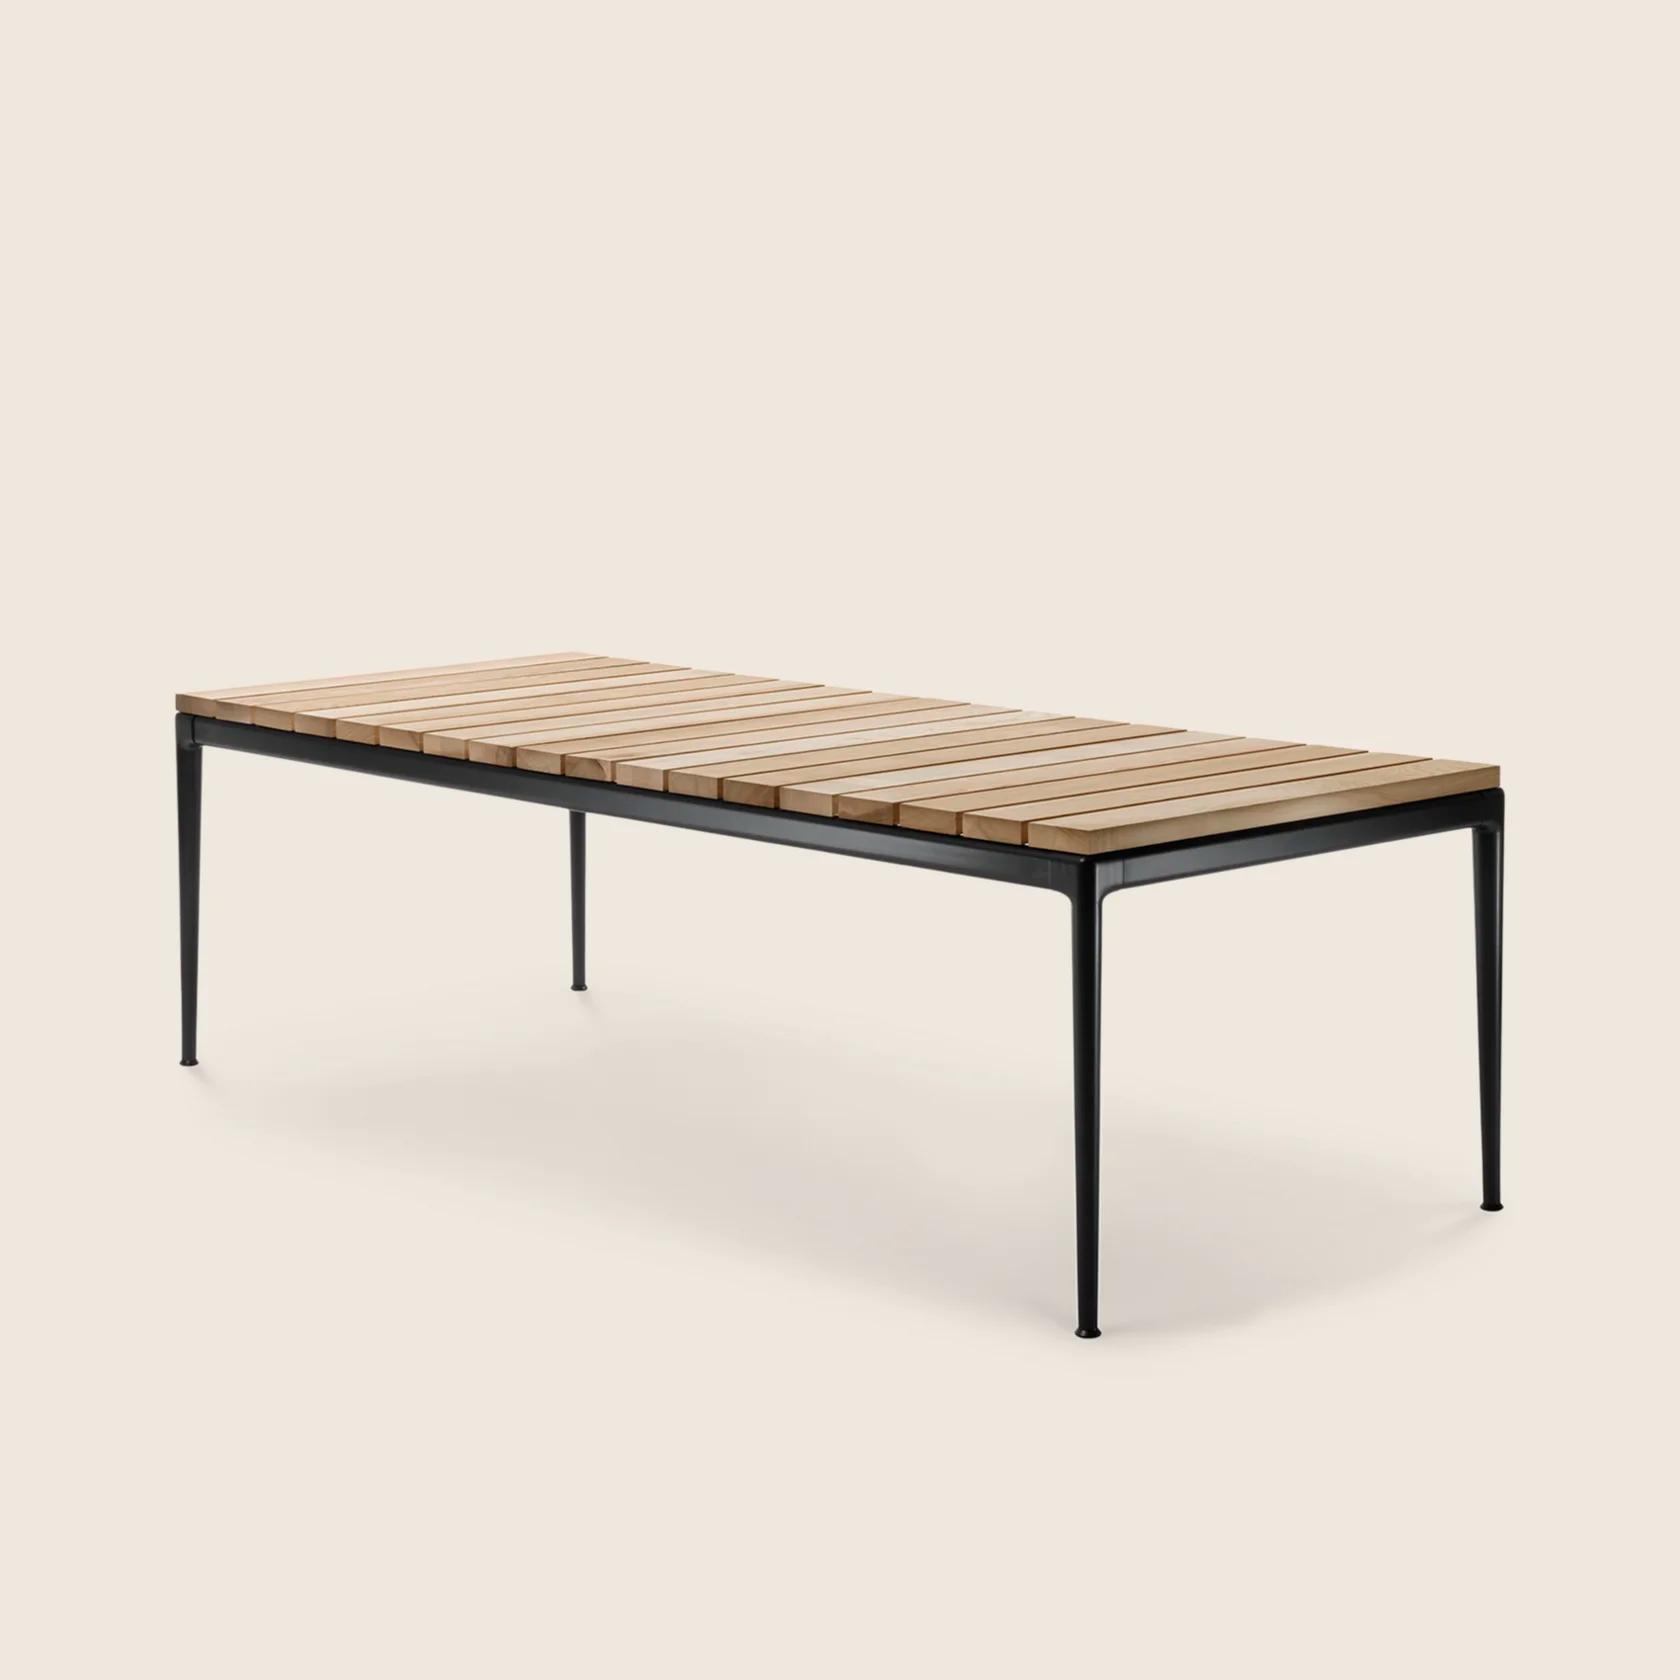 0283L0_PICO OUTDOOR_TABLE_04.png